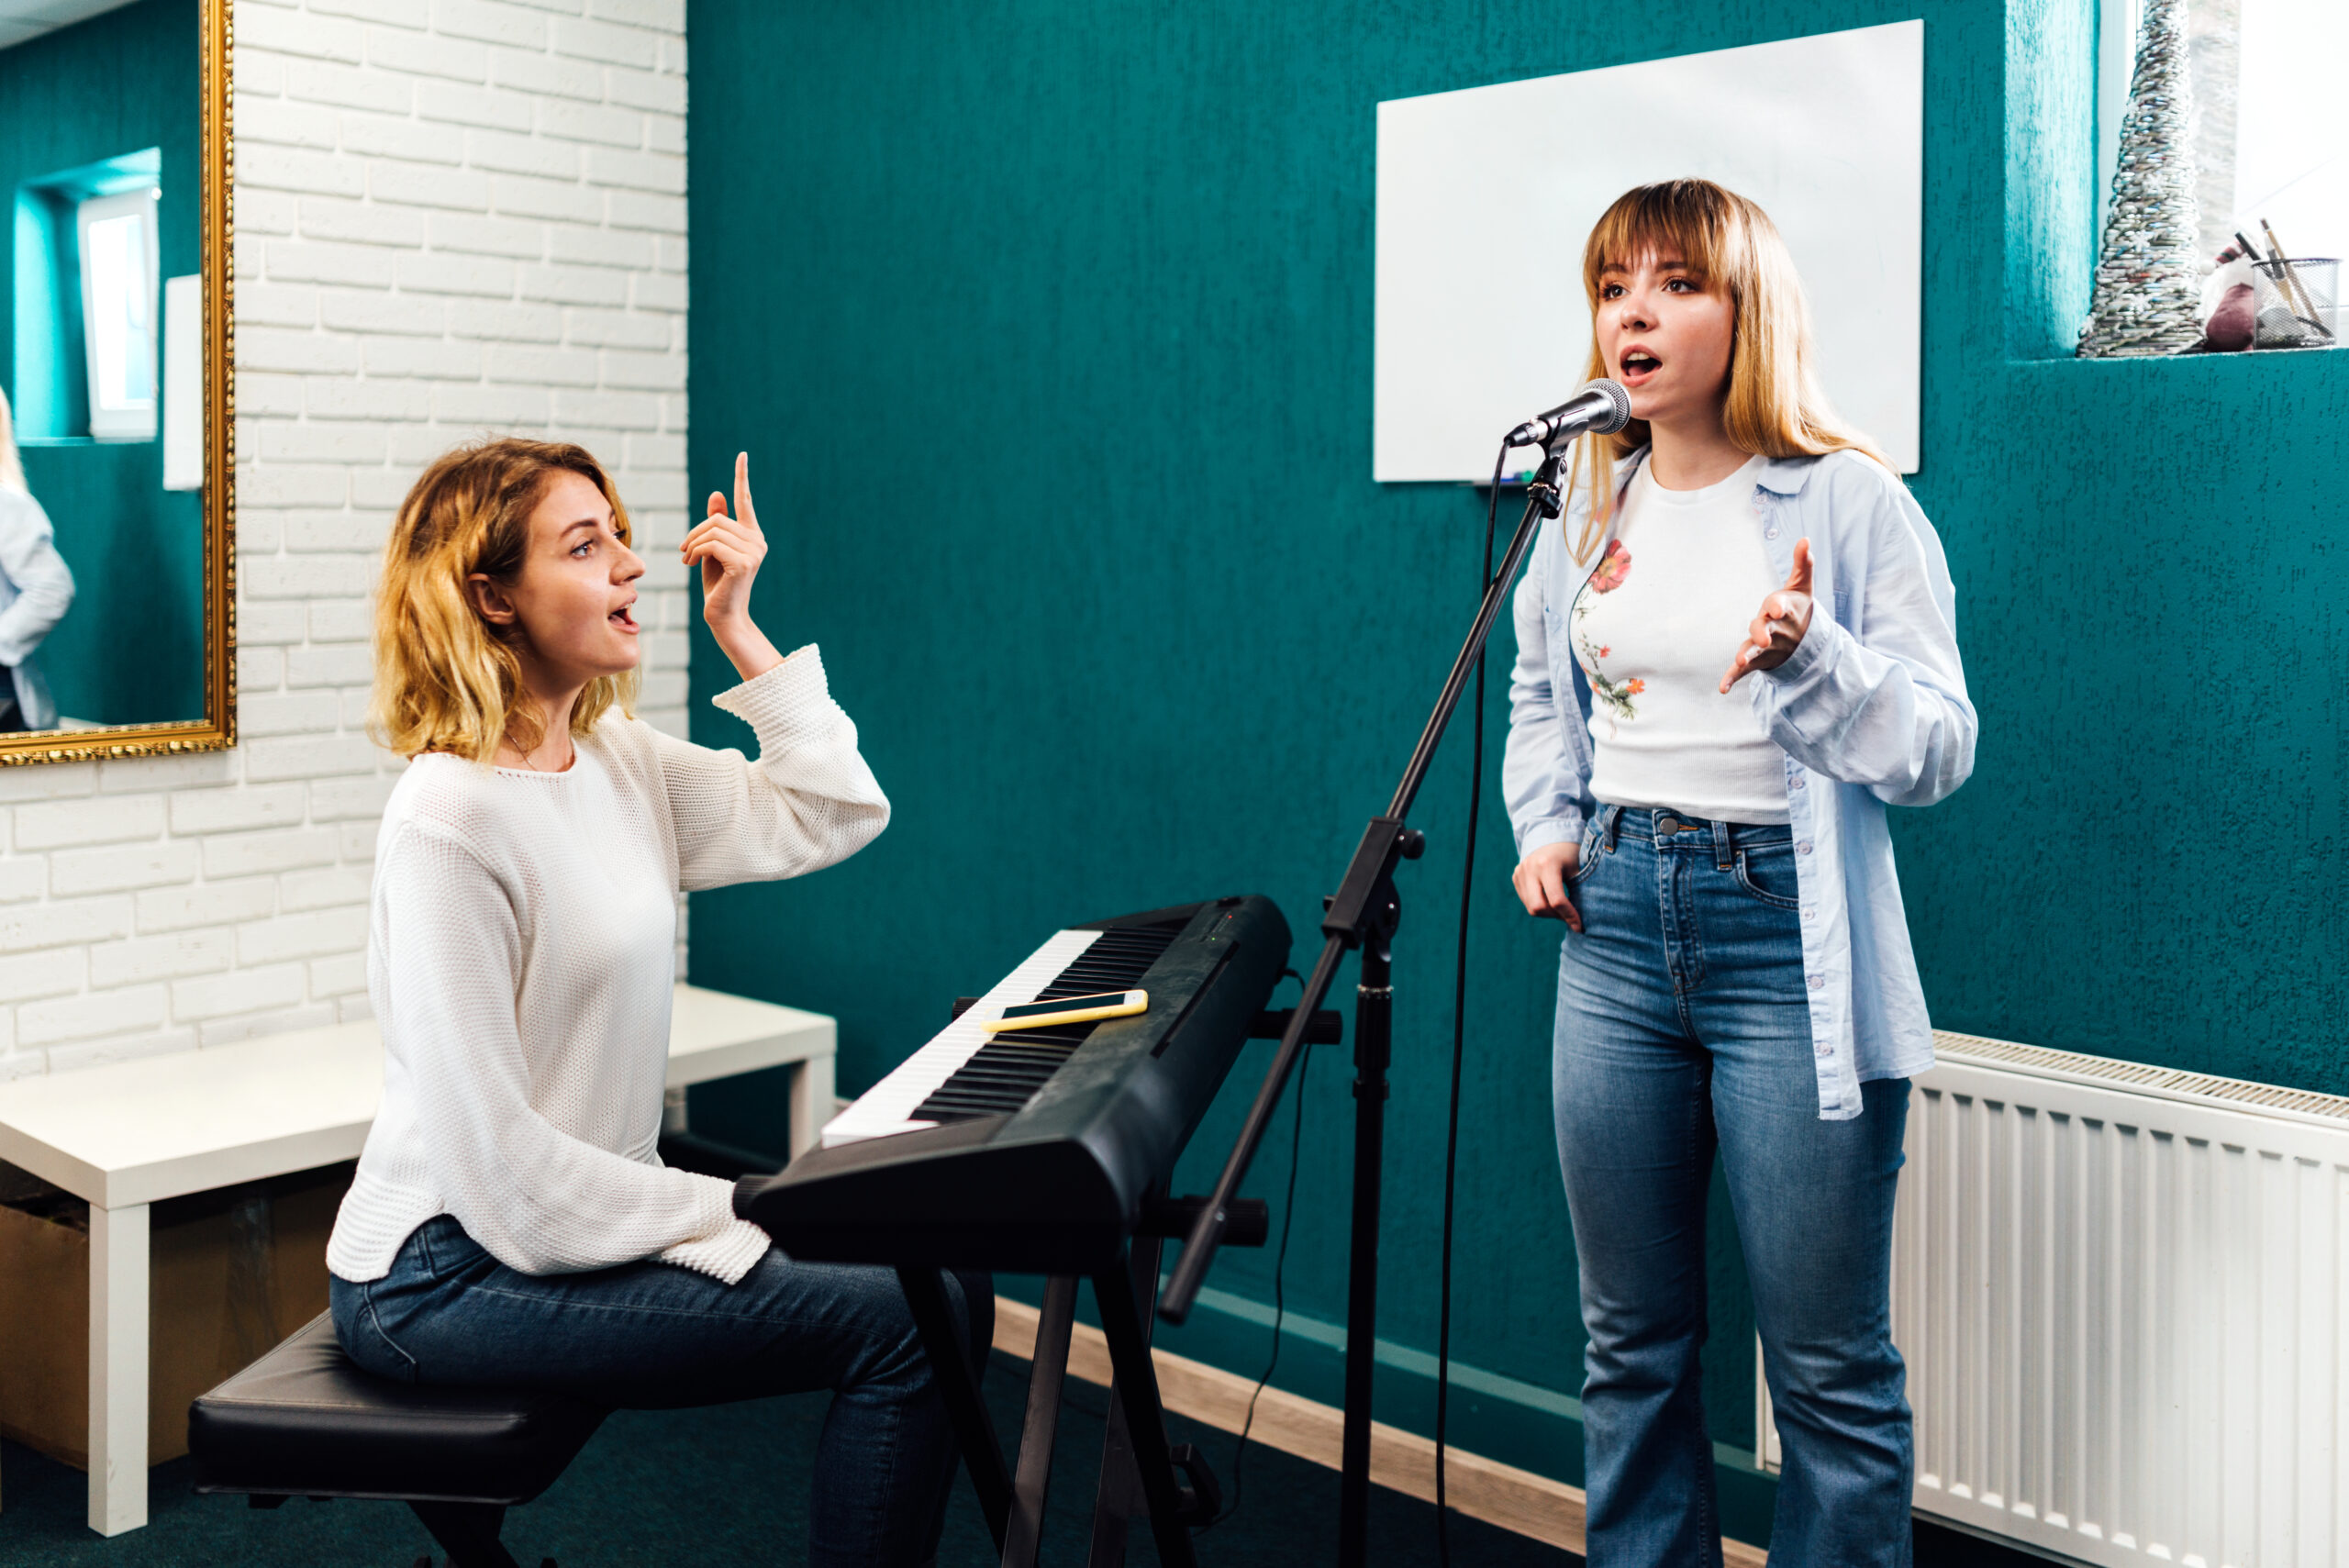 Vocal lesson in singing class at music academy